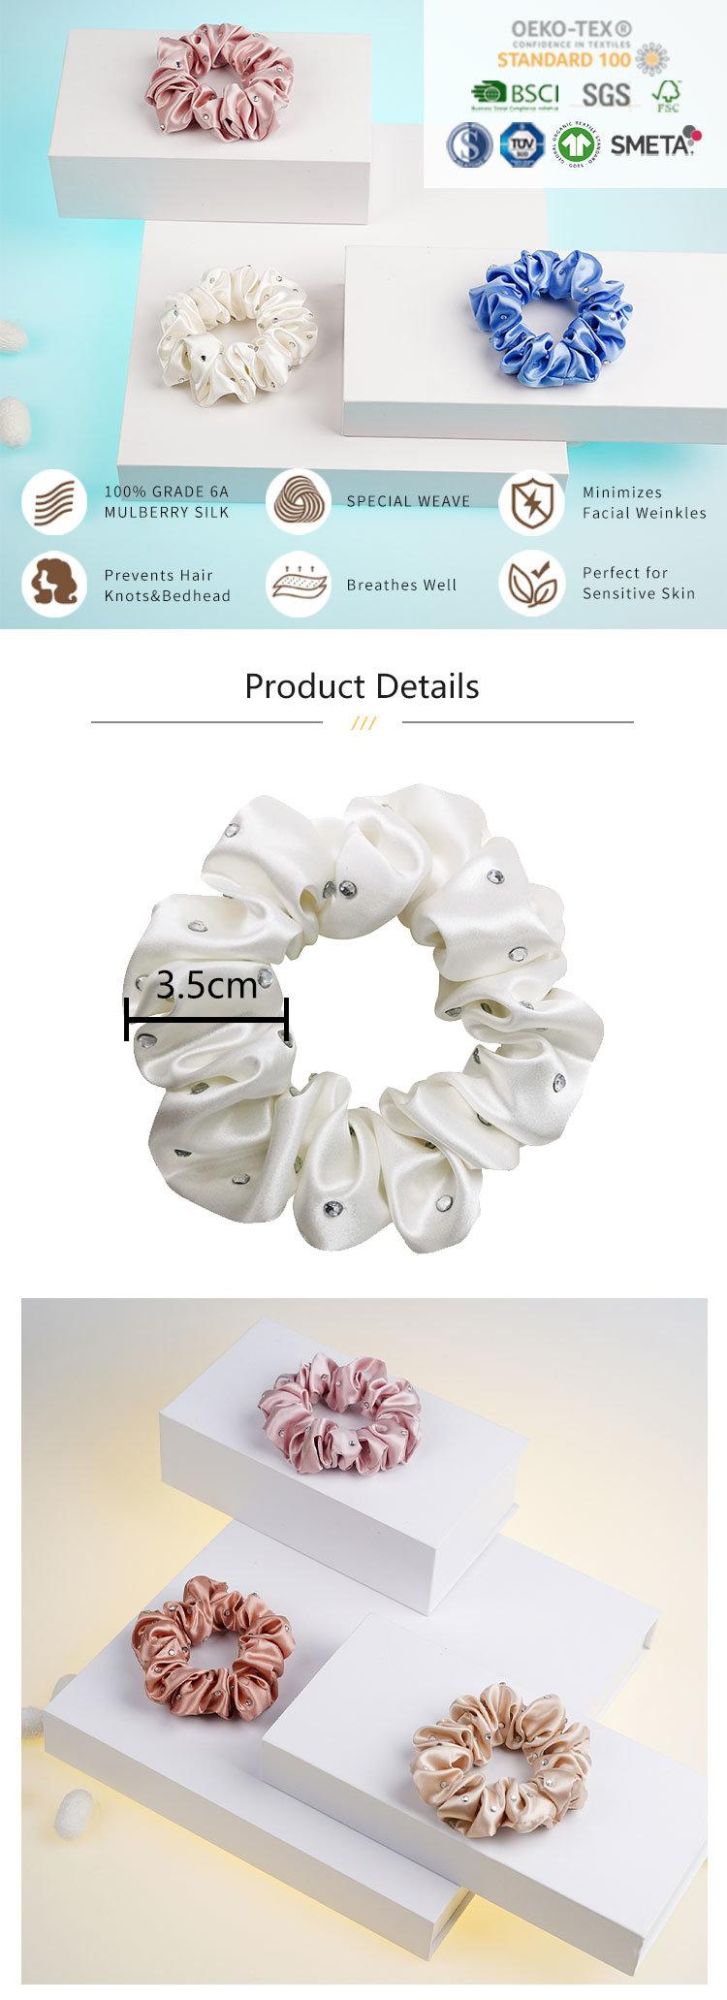 High Quality Mulberry Silk Scrunchies for Festival Gift Set with New Style